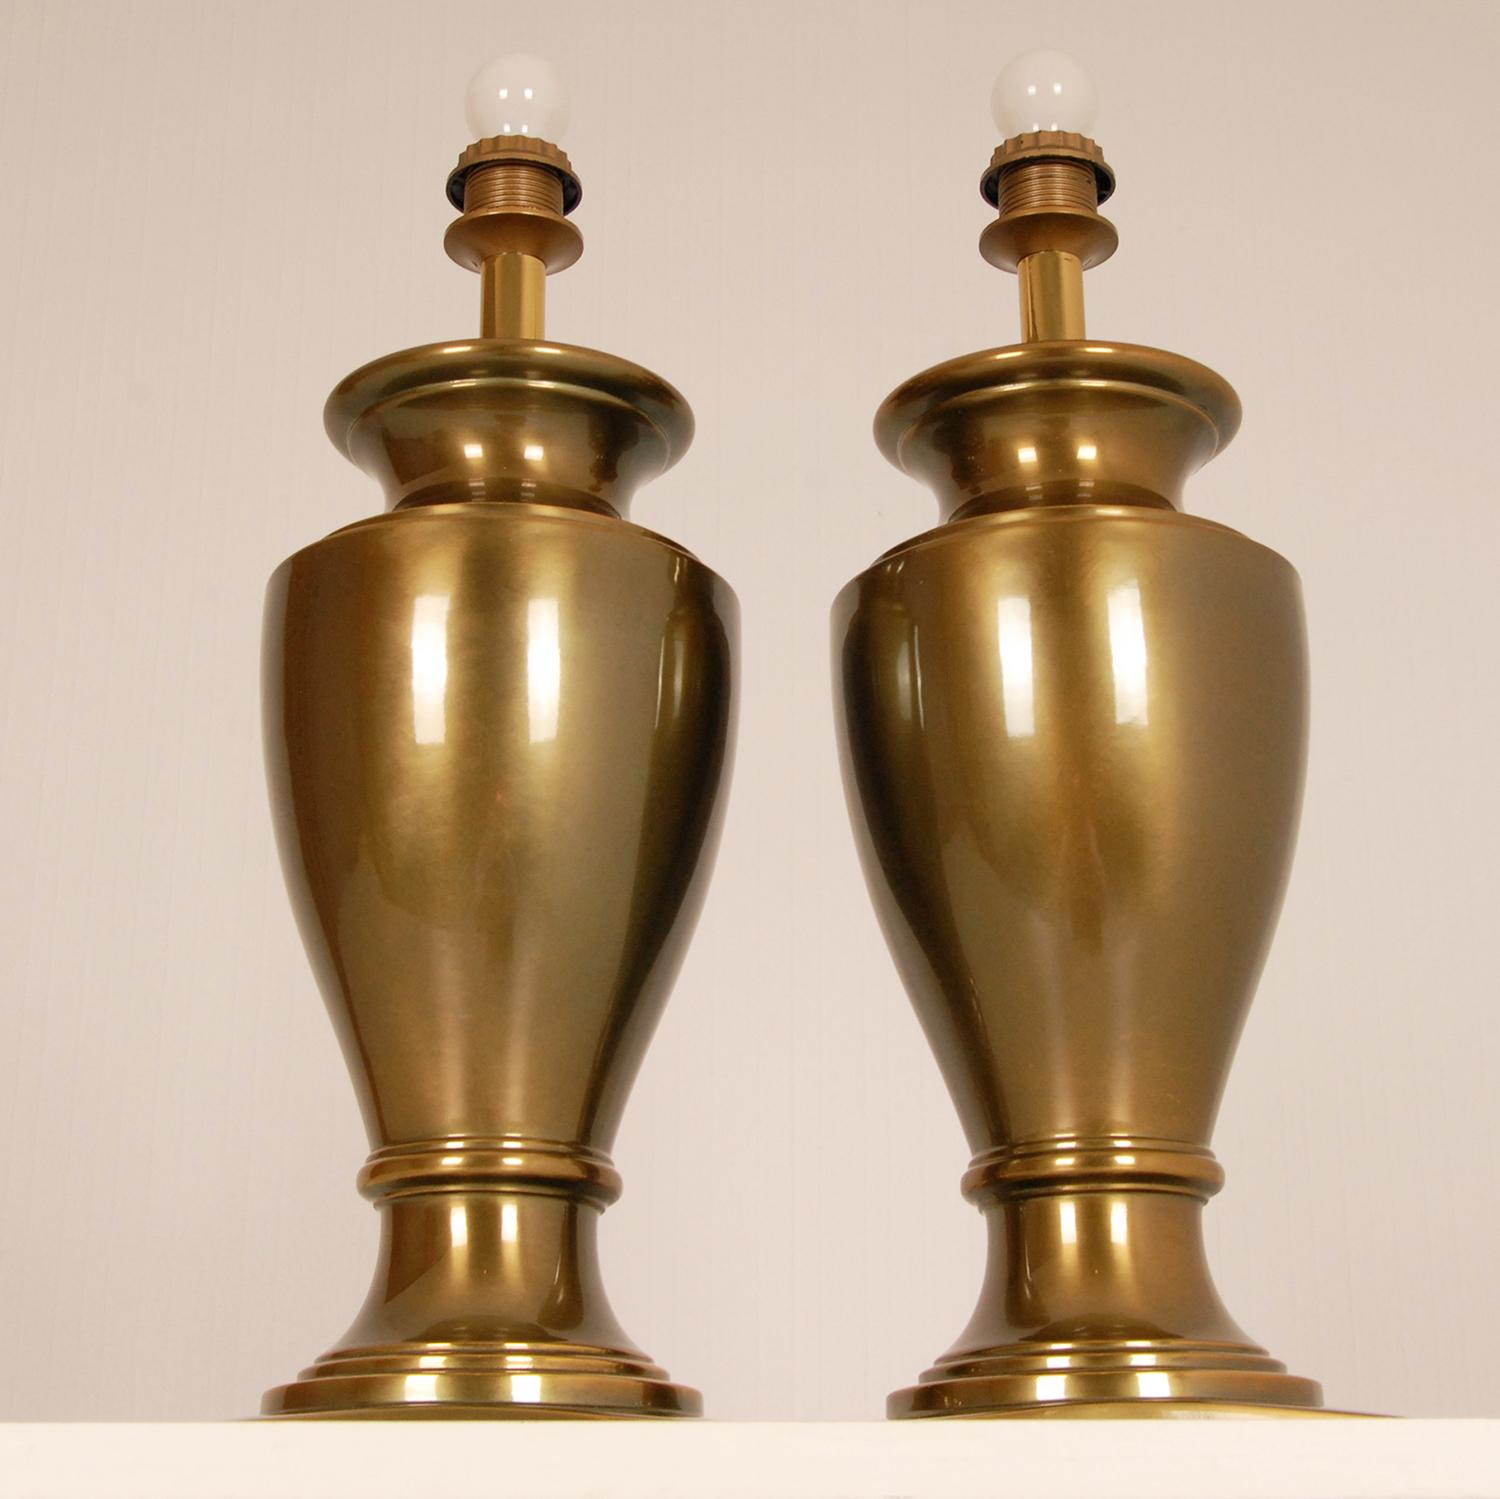 Vintage 1970s Gold Gilt Brass Neoclassical Vase Table Lamps, a Pair For Sale 3